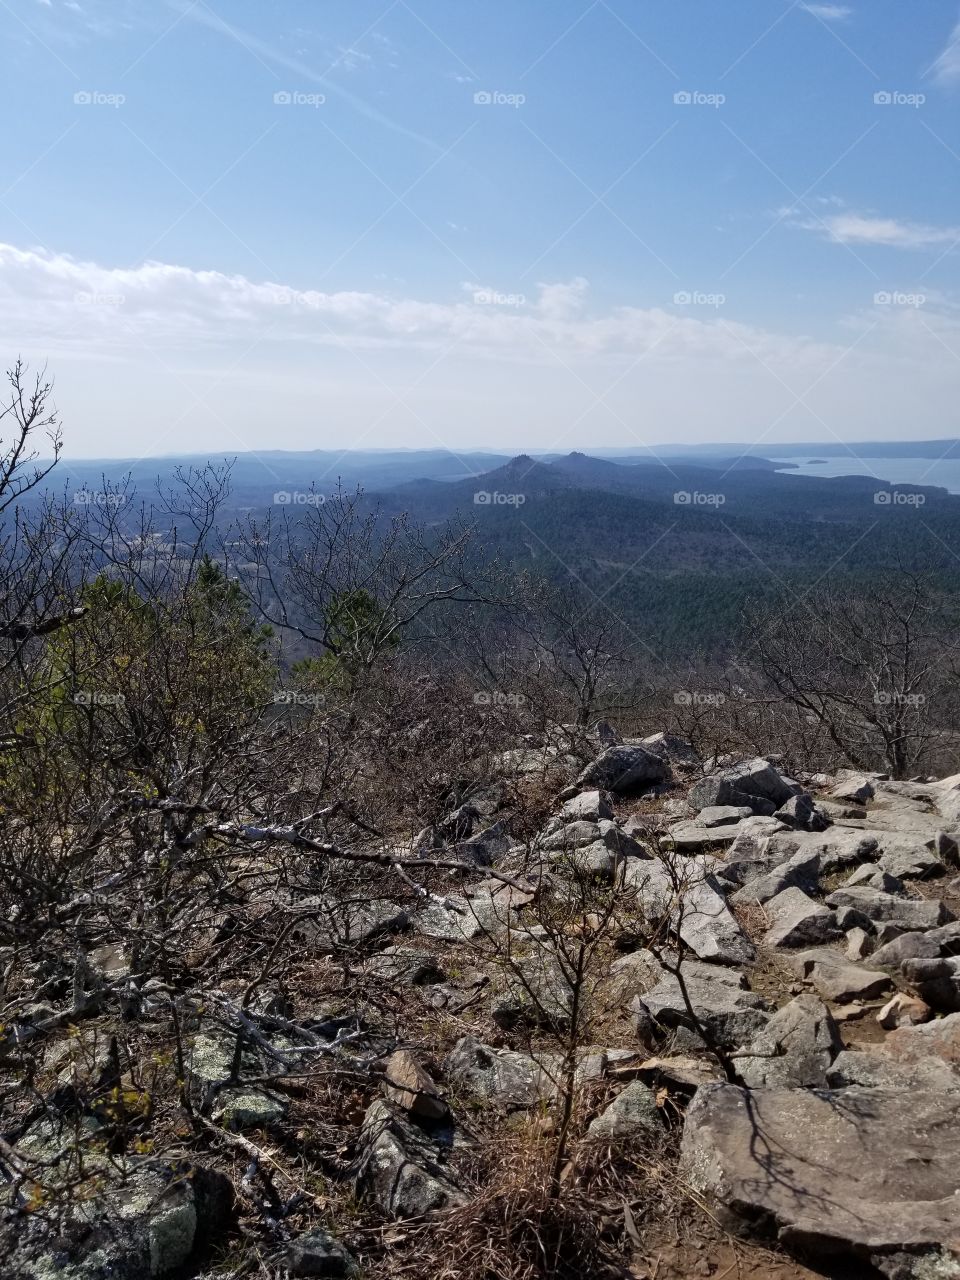 At the top of the Pinnacle Mountain